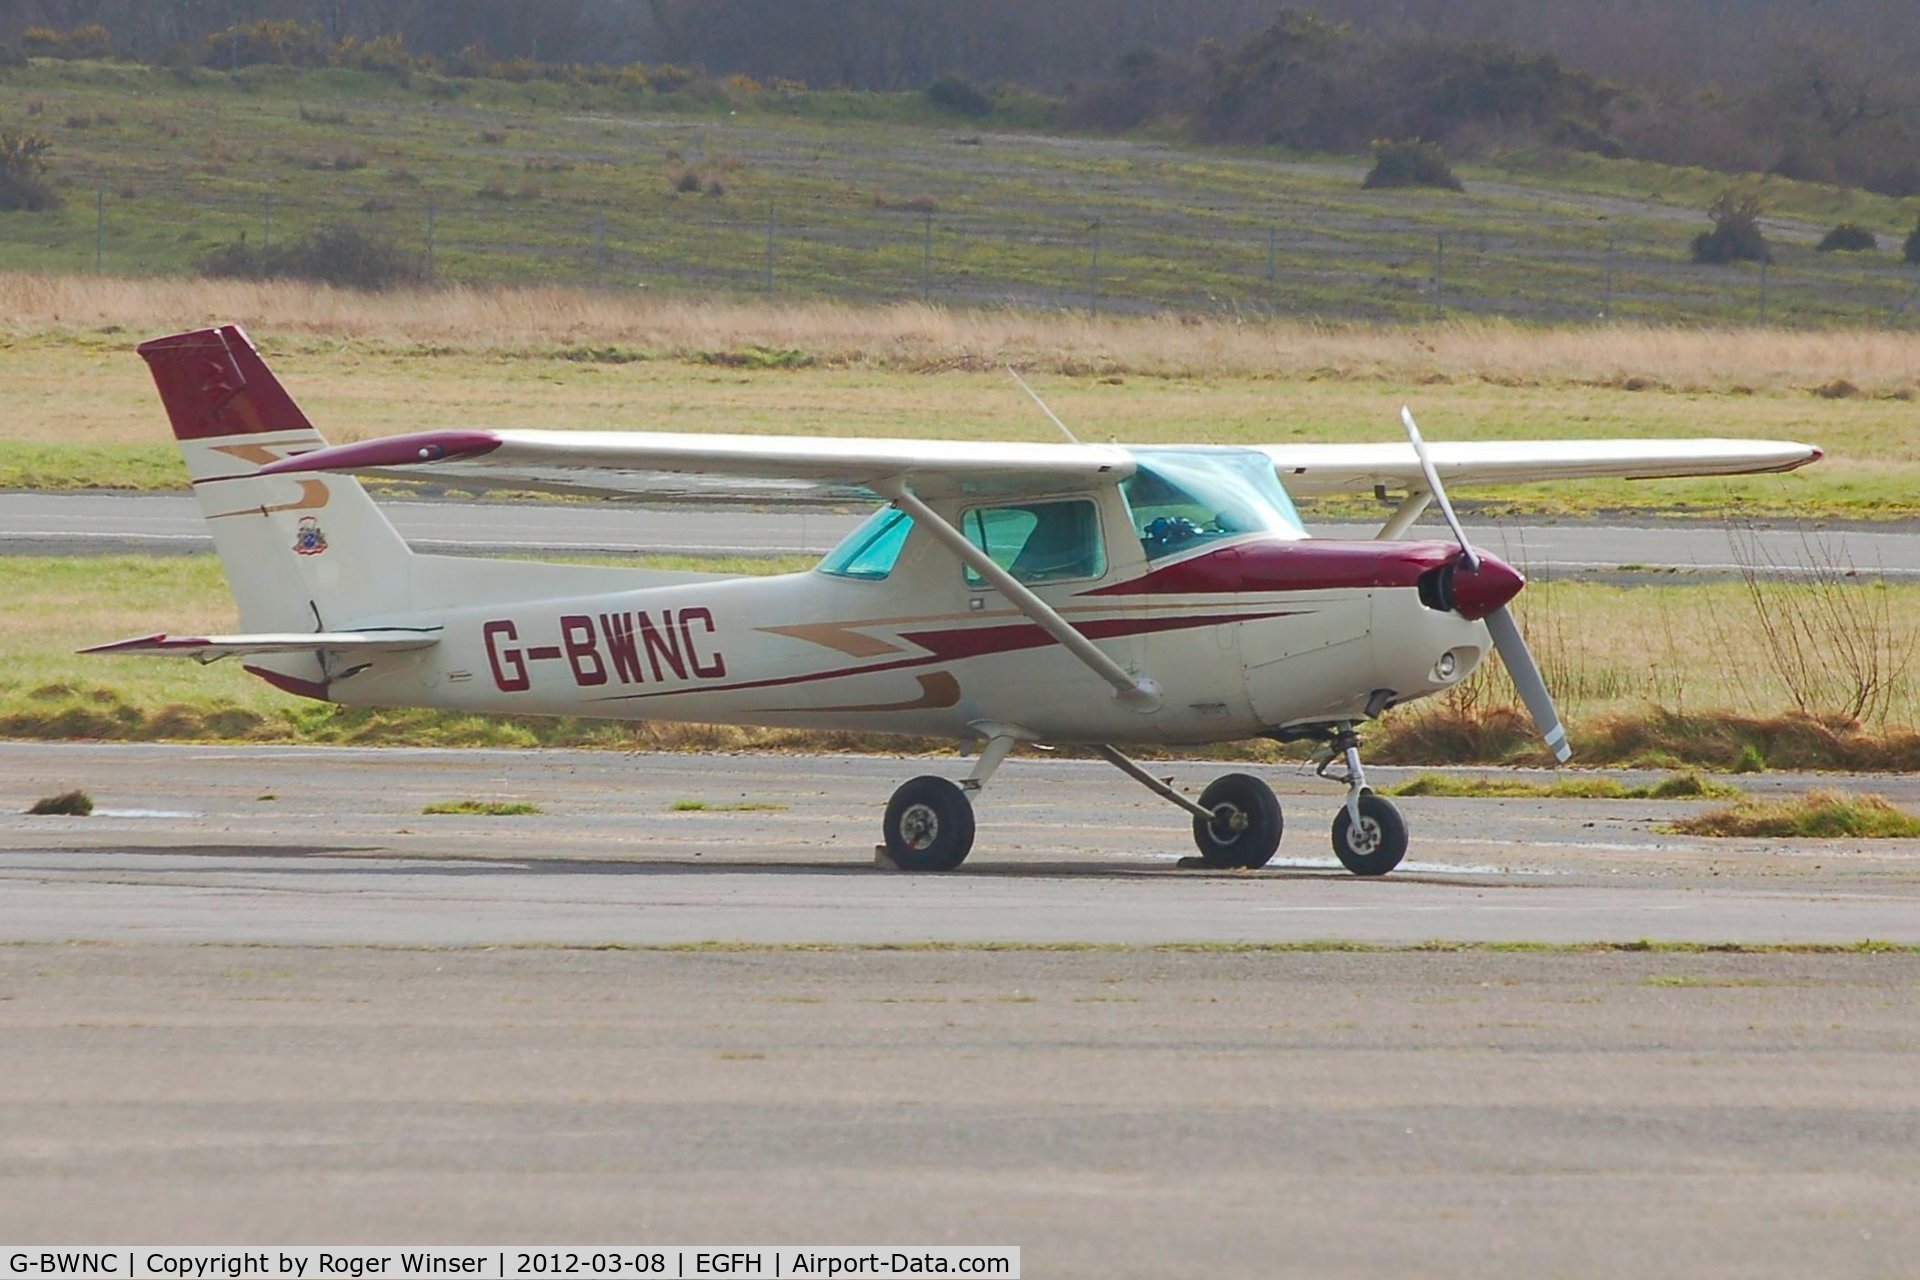 G-BWNC, 1980 Cessna 152 C/N 152-84415, Visitng Cessna 152 from the South Warwickshire School of Flying.